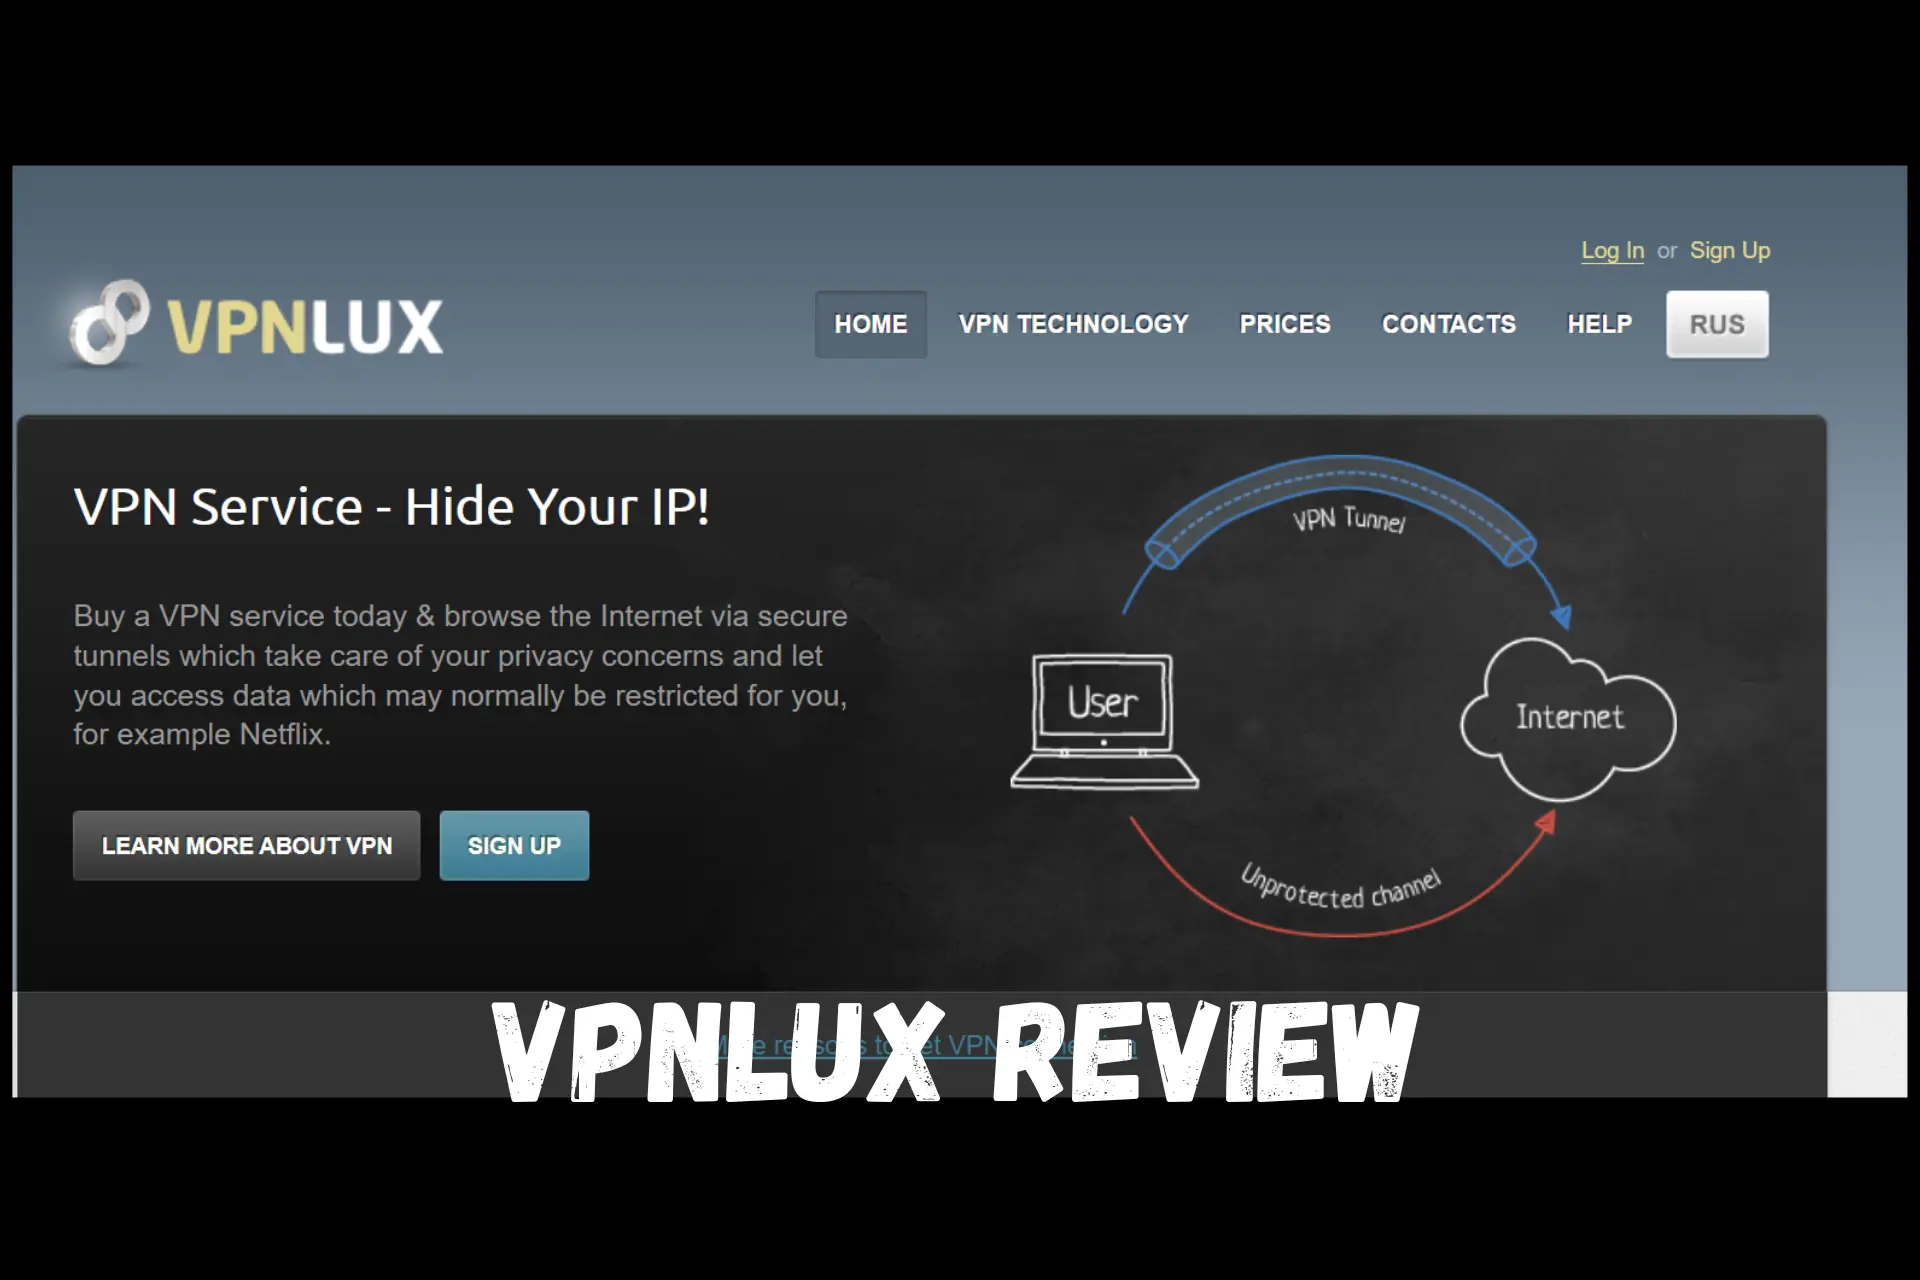 vpnlux review featured image